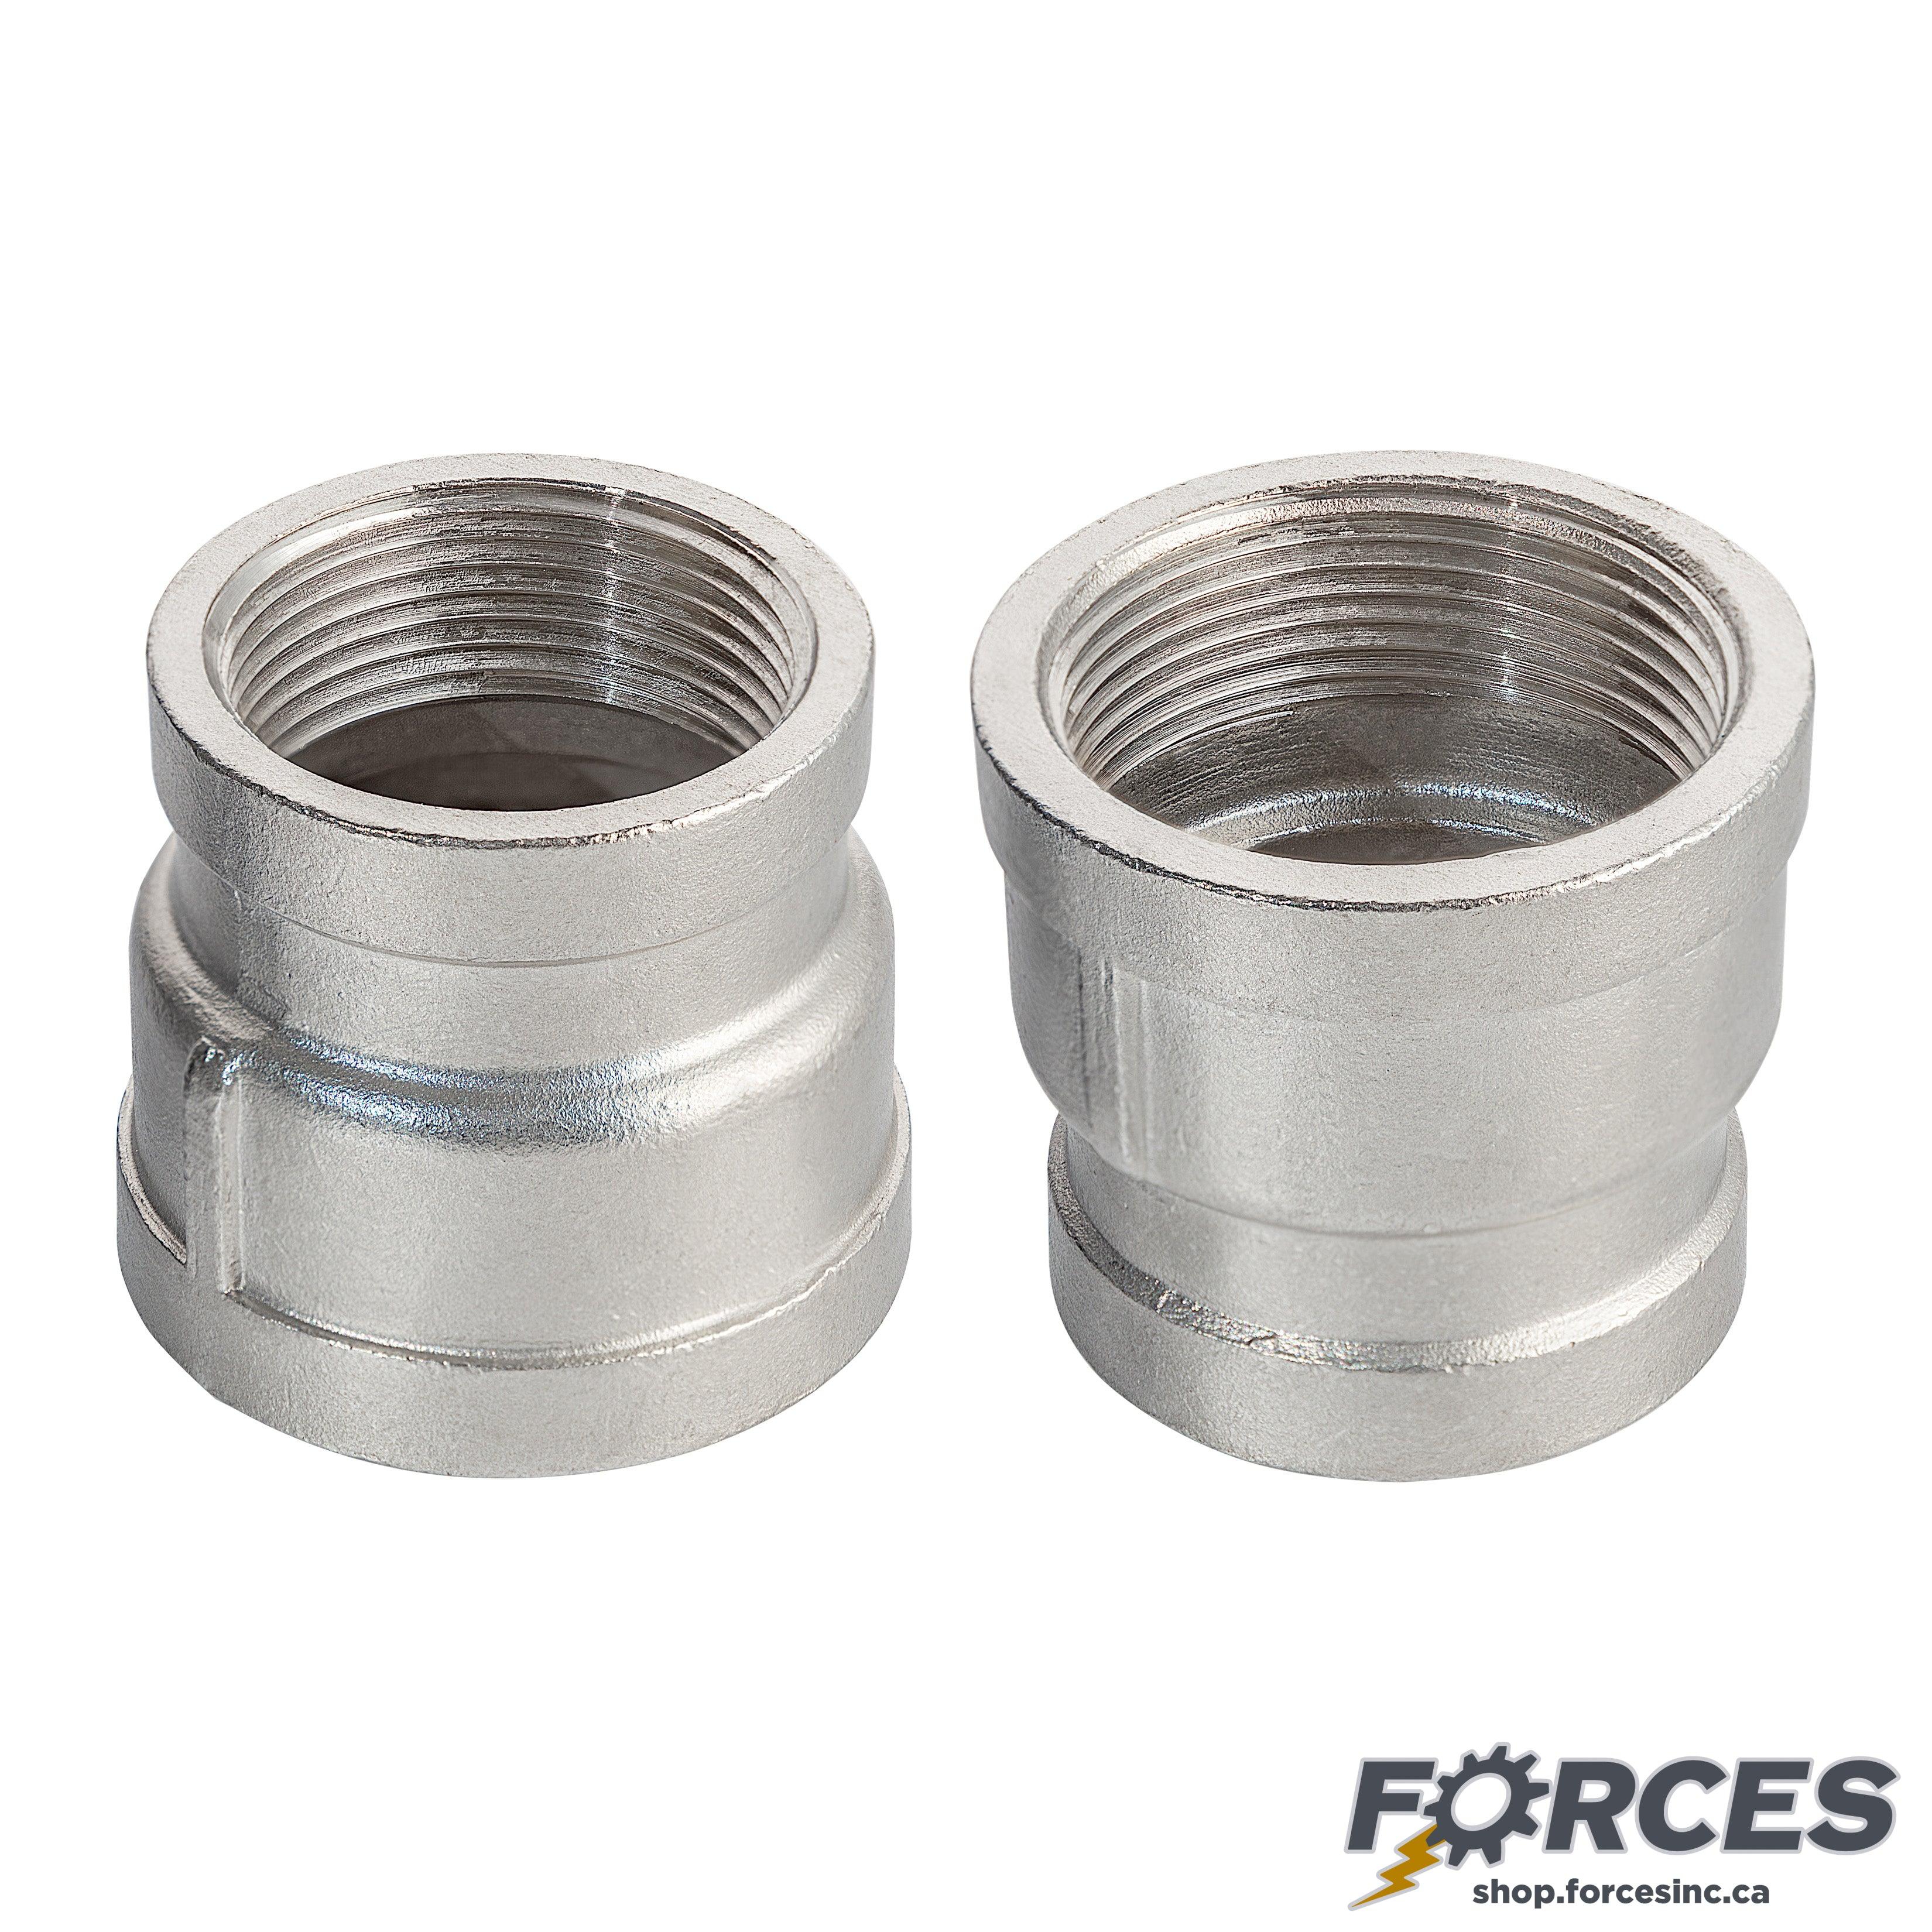 1/2" x 1/4" Coupling Reducer NPT #150 - Stainless Steel 316 - Forces Inc